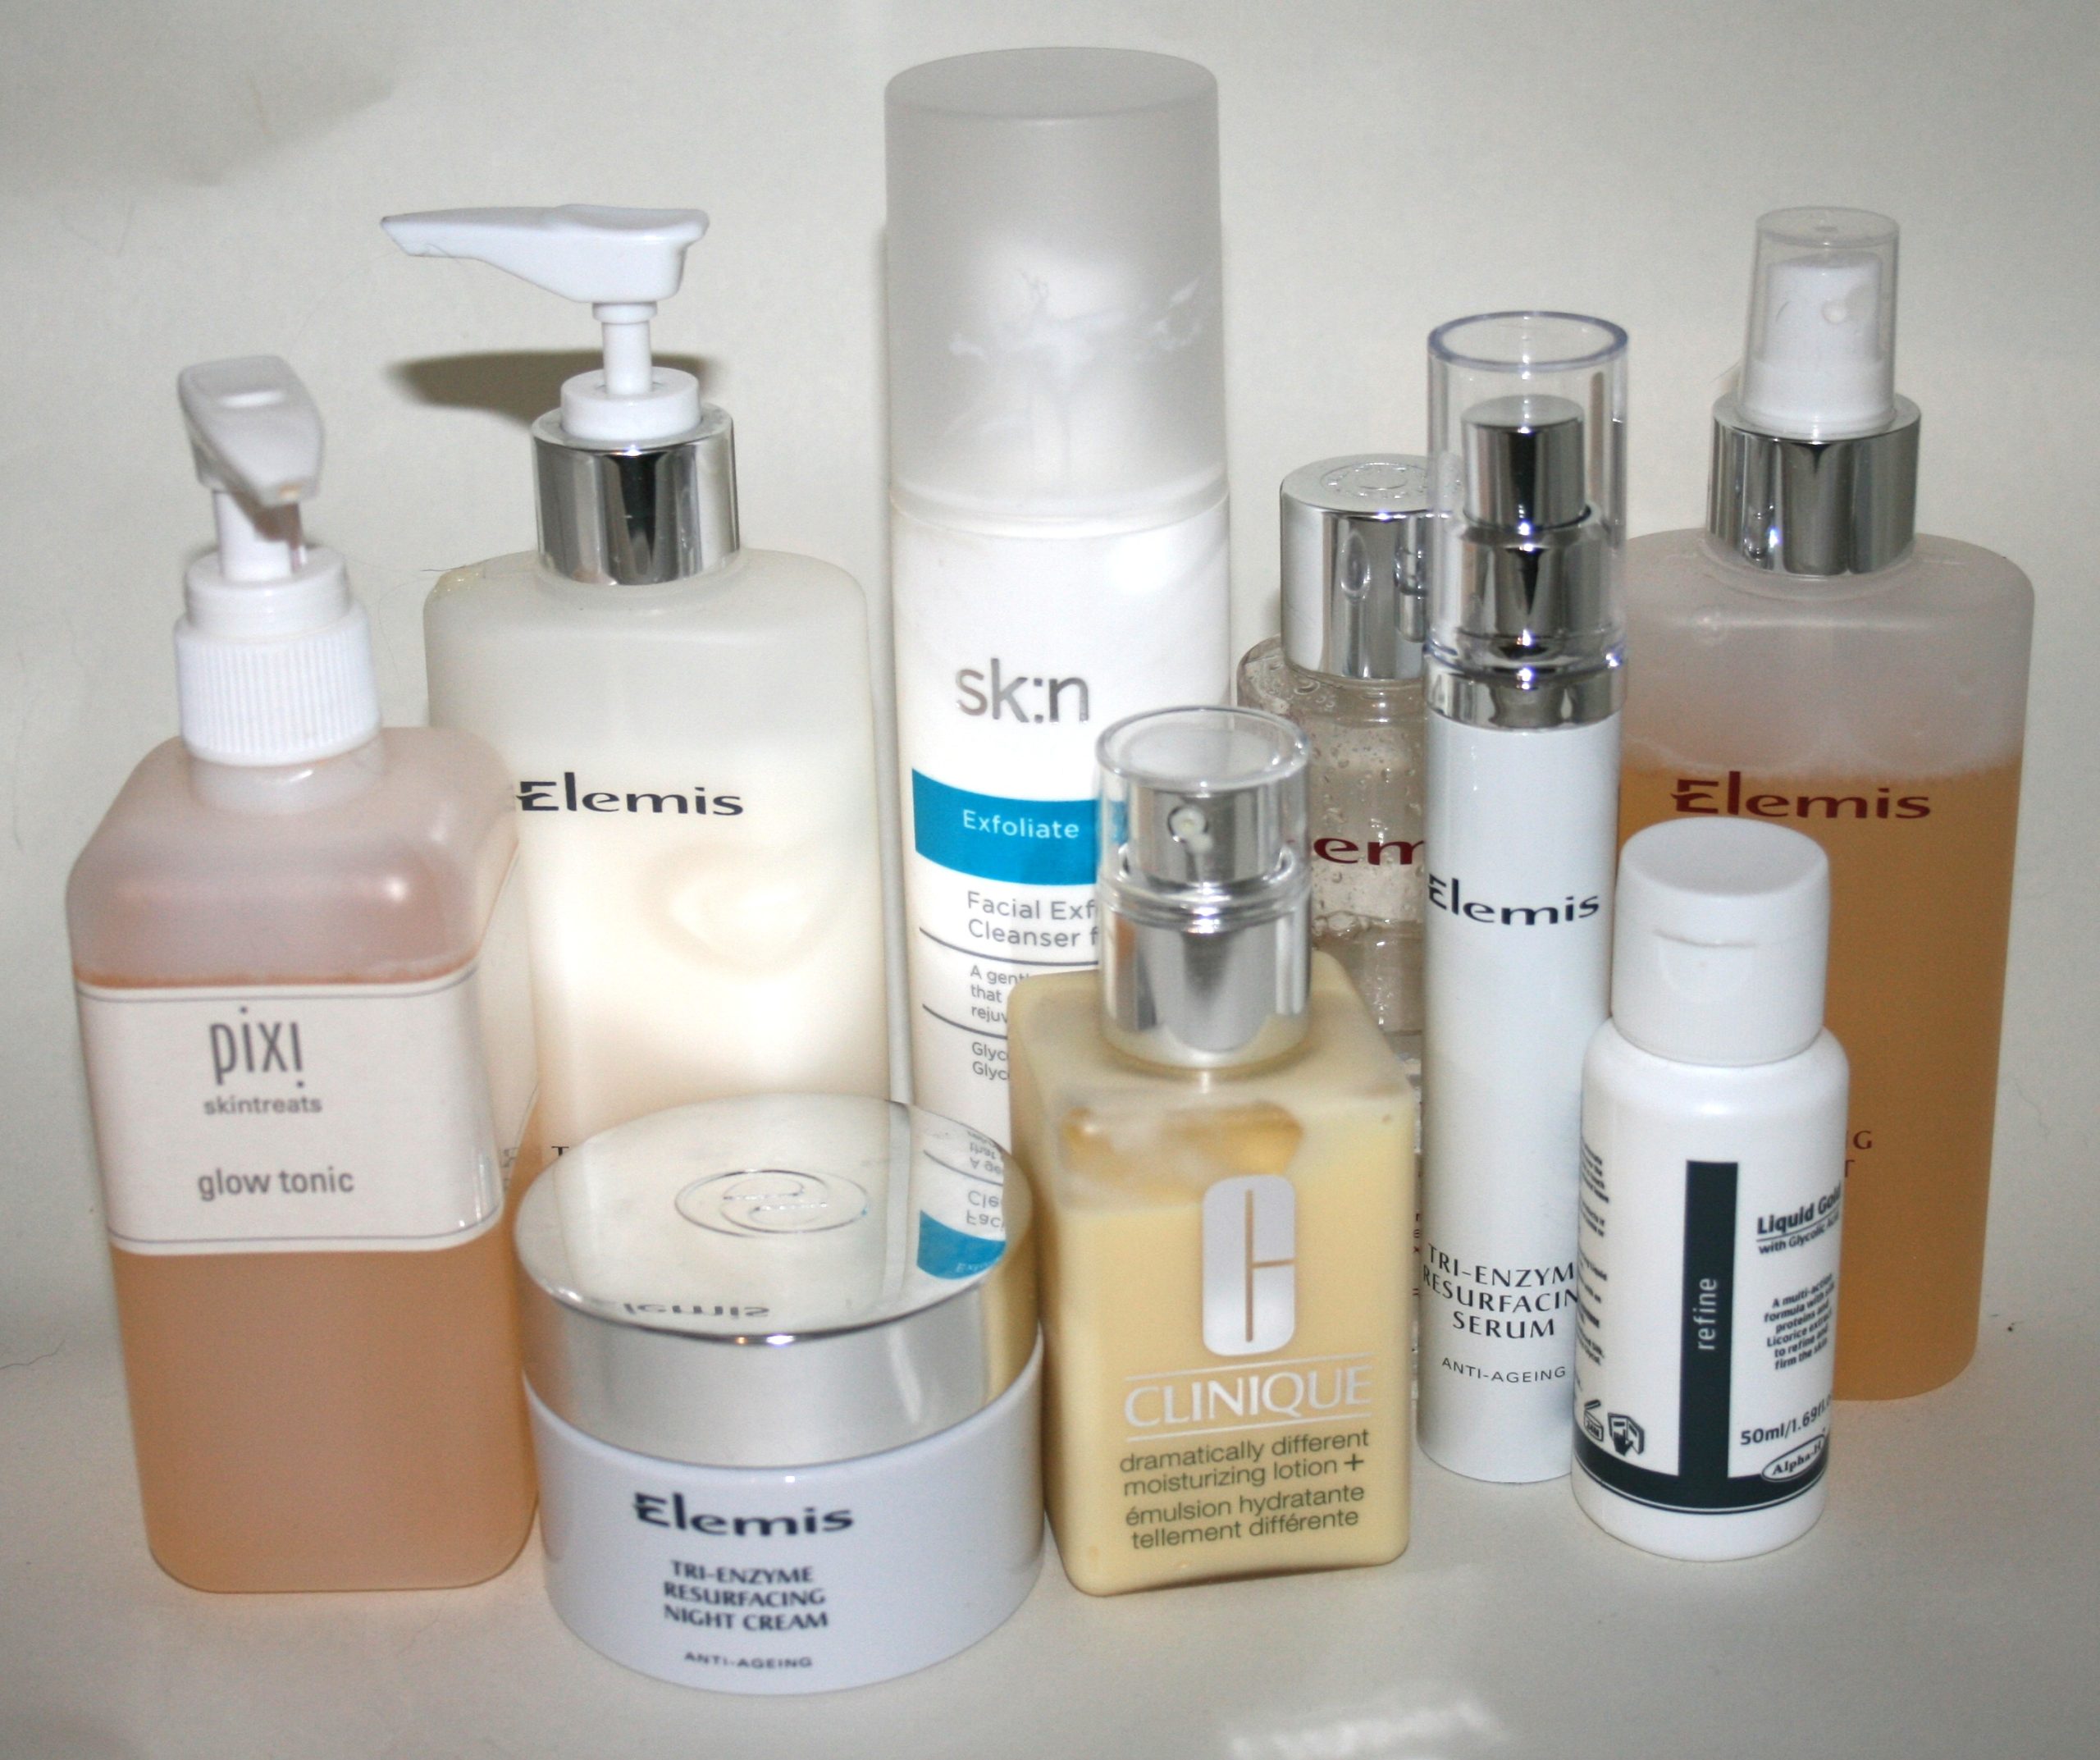 My Current Skincare Routine (July 2013)